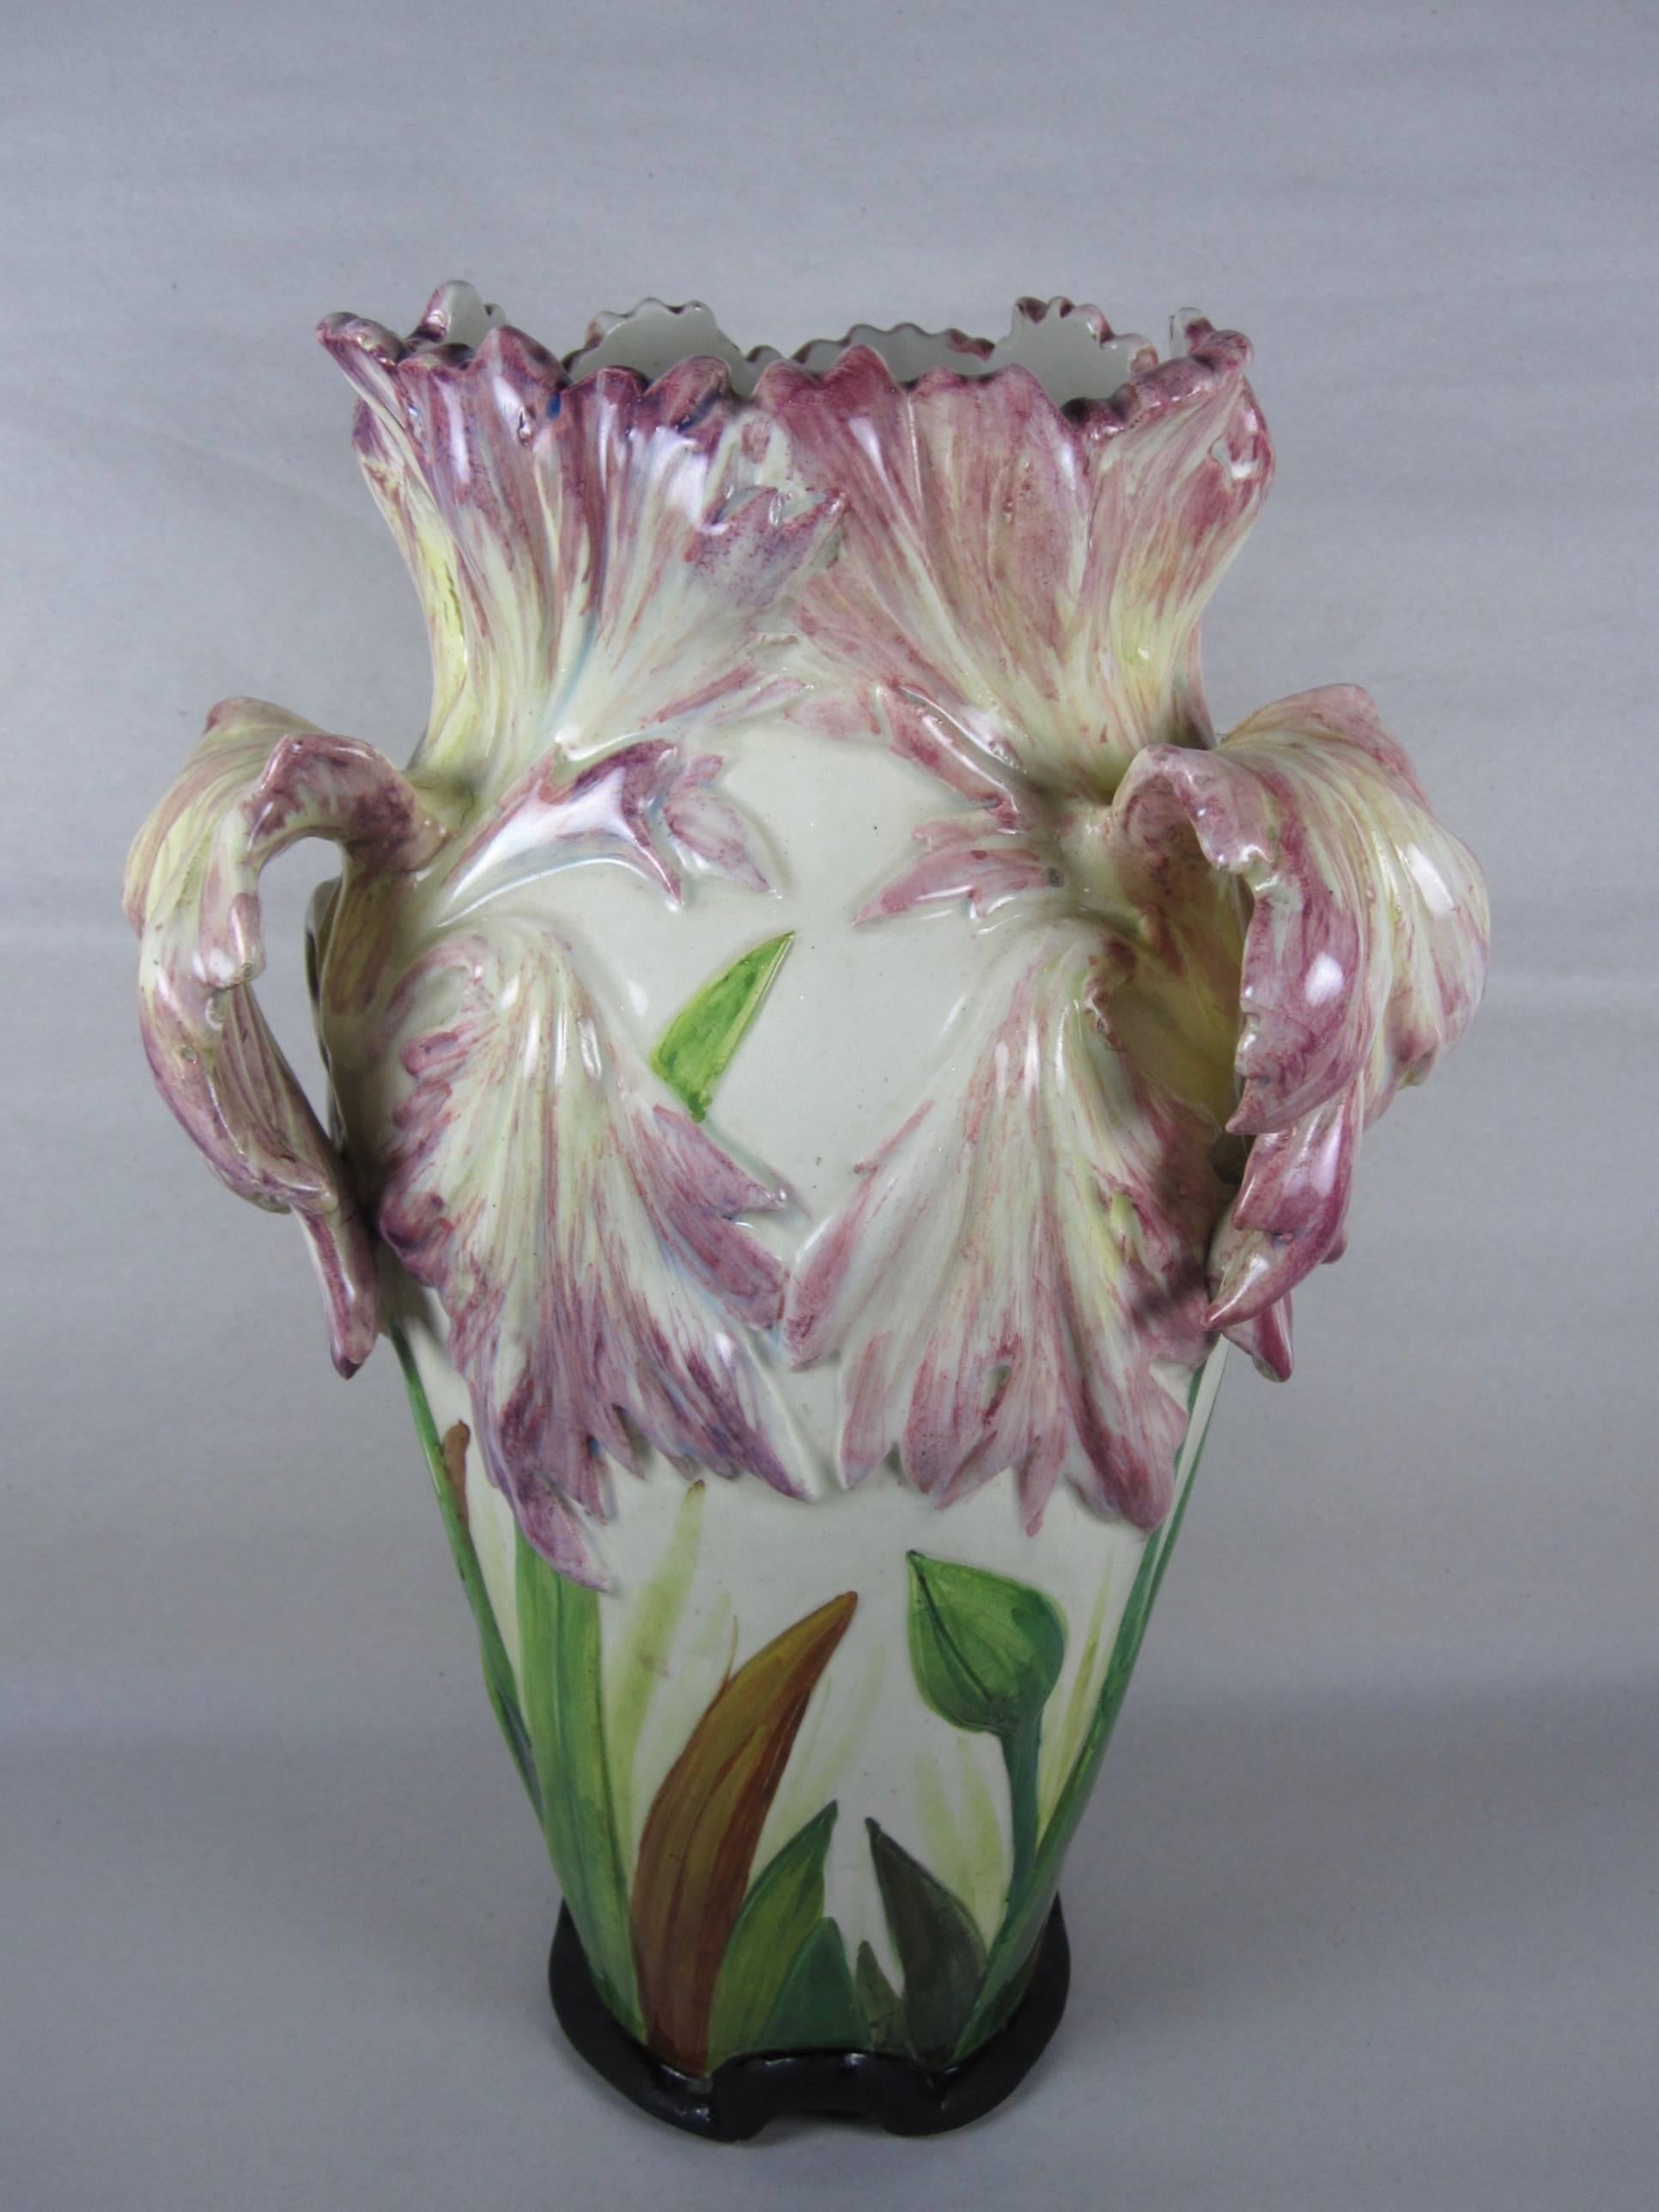 A late 19th century, large French Barbotine, Majolica glazed Art Nouveau pottery vase with a Parrot Tulip theme. Three pink cascading petals make up the handles on a cream colored body with hand-painted foliage and tulip buds encircling the base.